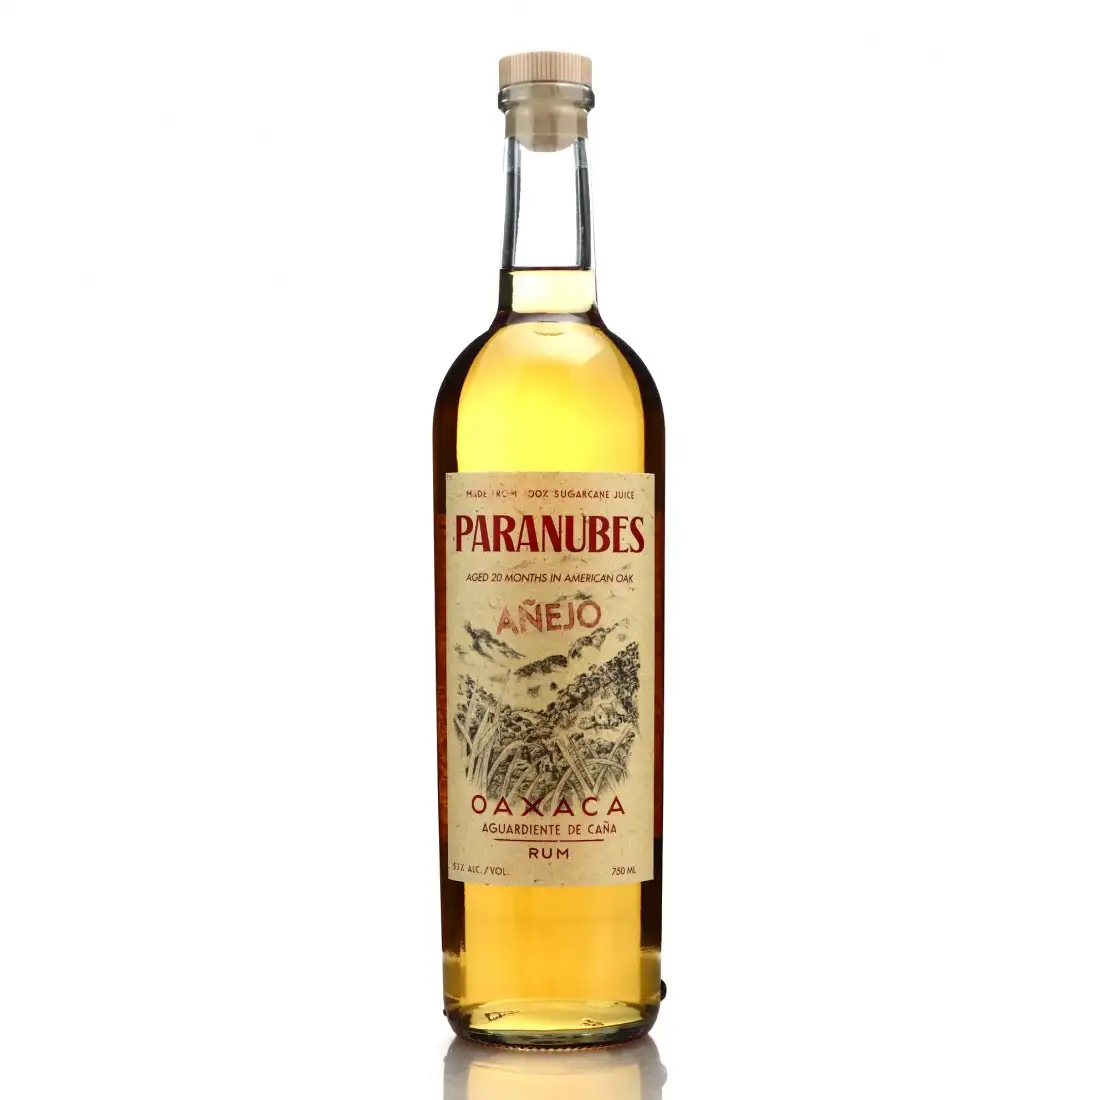 Image of the front of the bottle of the rum Paranubes Oaxaca Añejo Rum Limited Edition